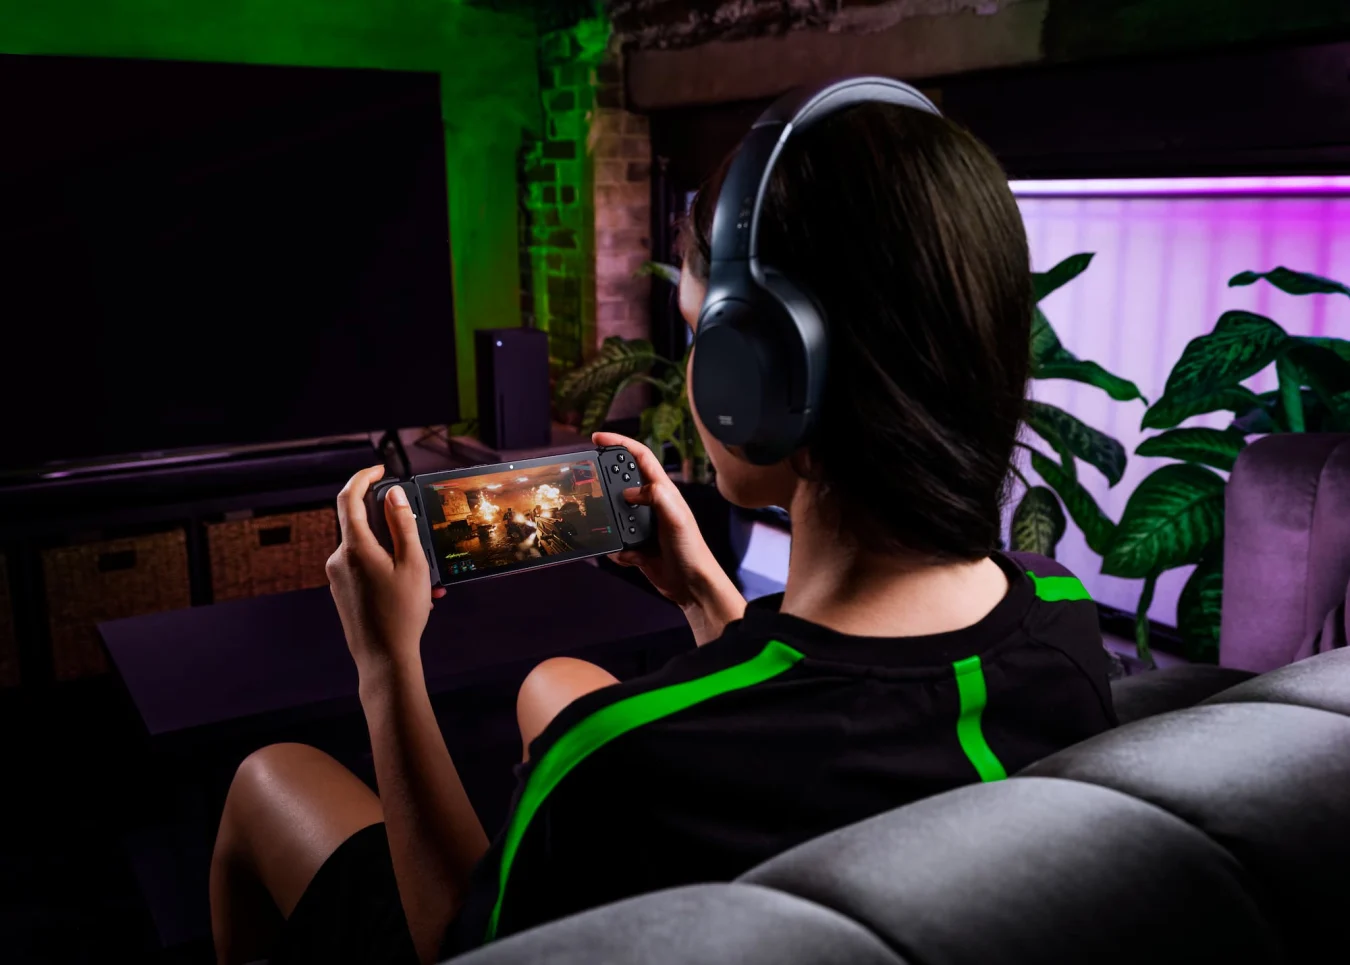 A person wearing headphones and sitting on a couch while holding a Razer Edge handheld gaming device.